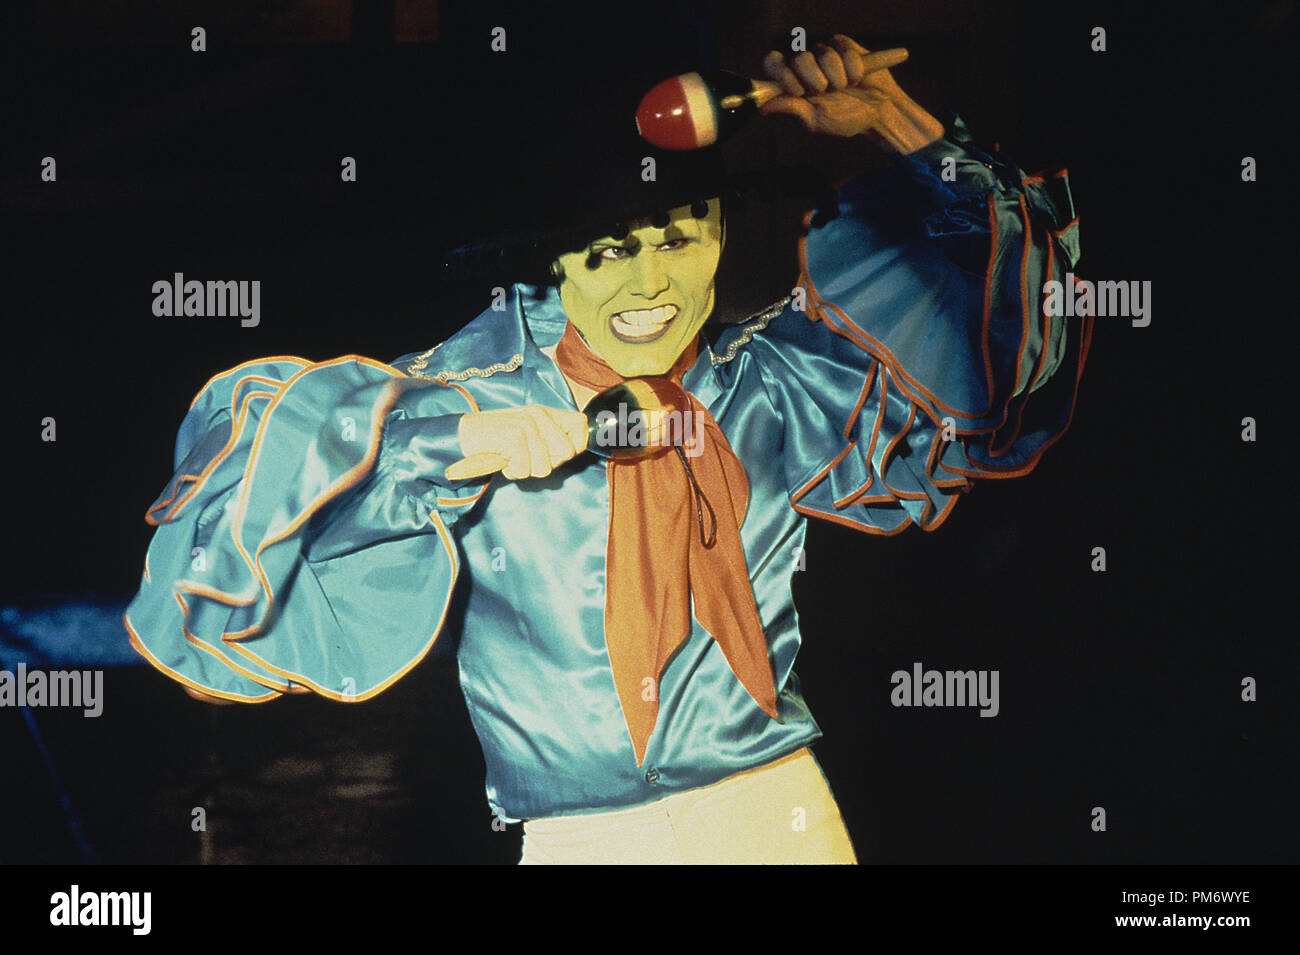 The Mask Jim Carrey High Resolution Stock Photography and Images - Alamy